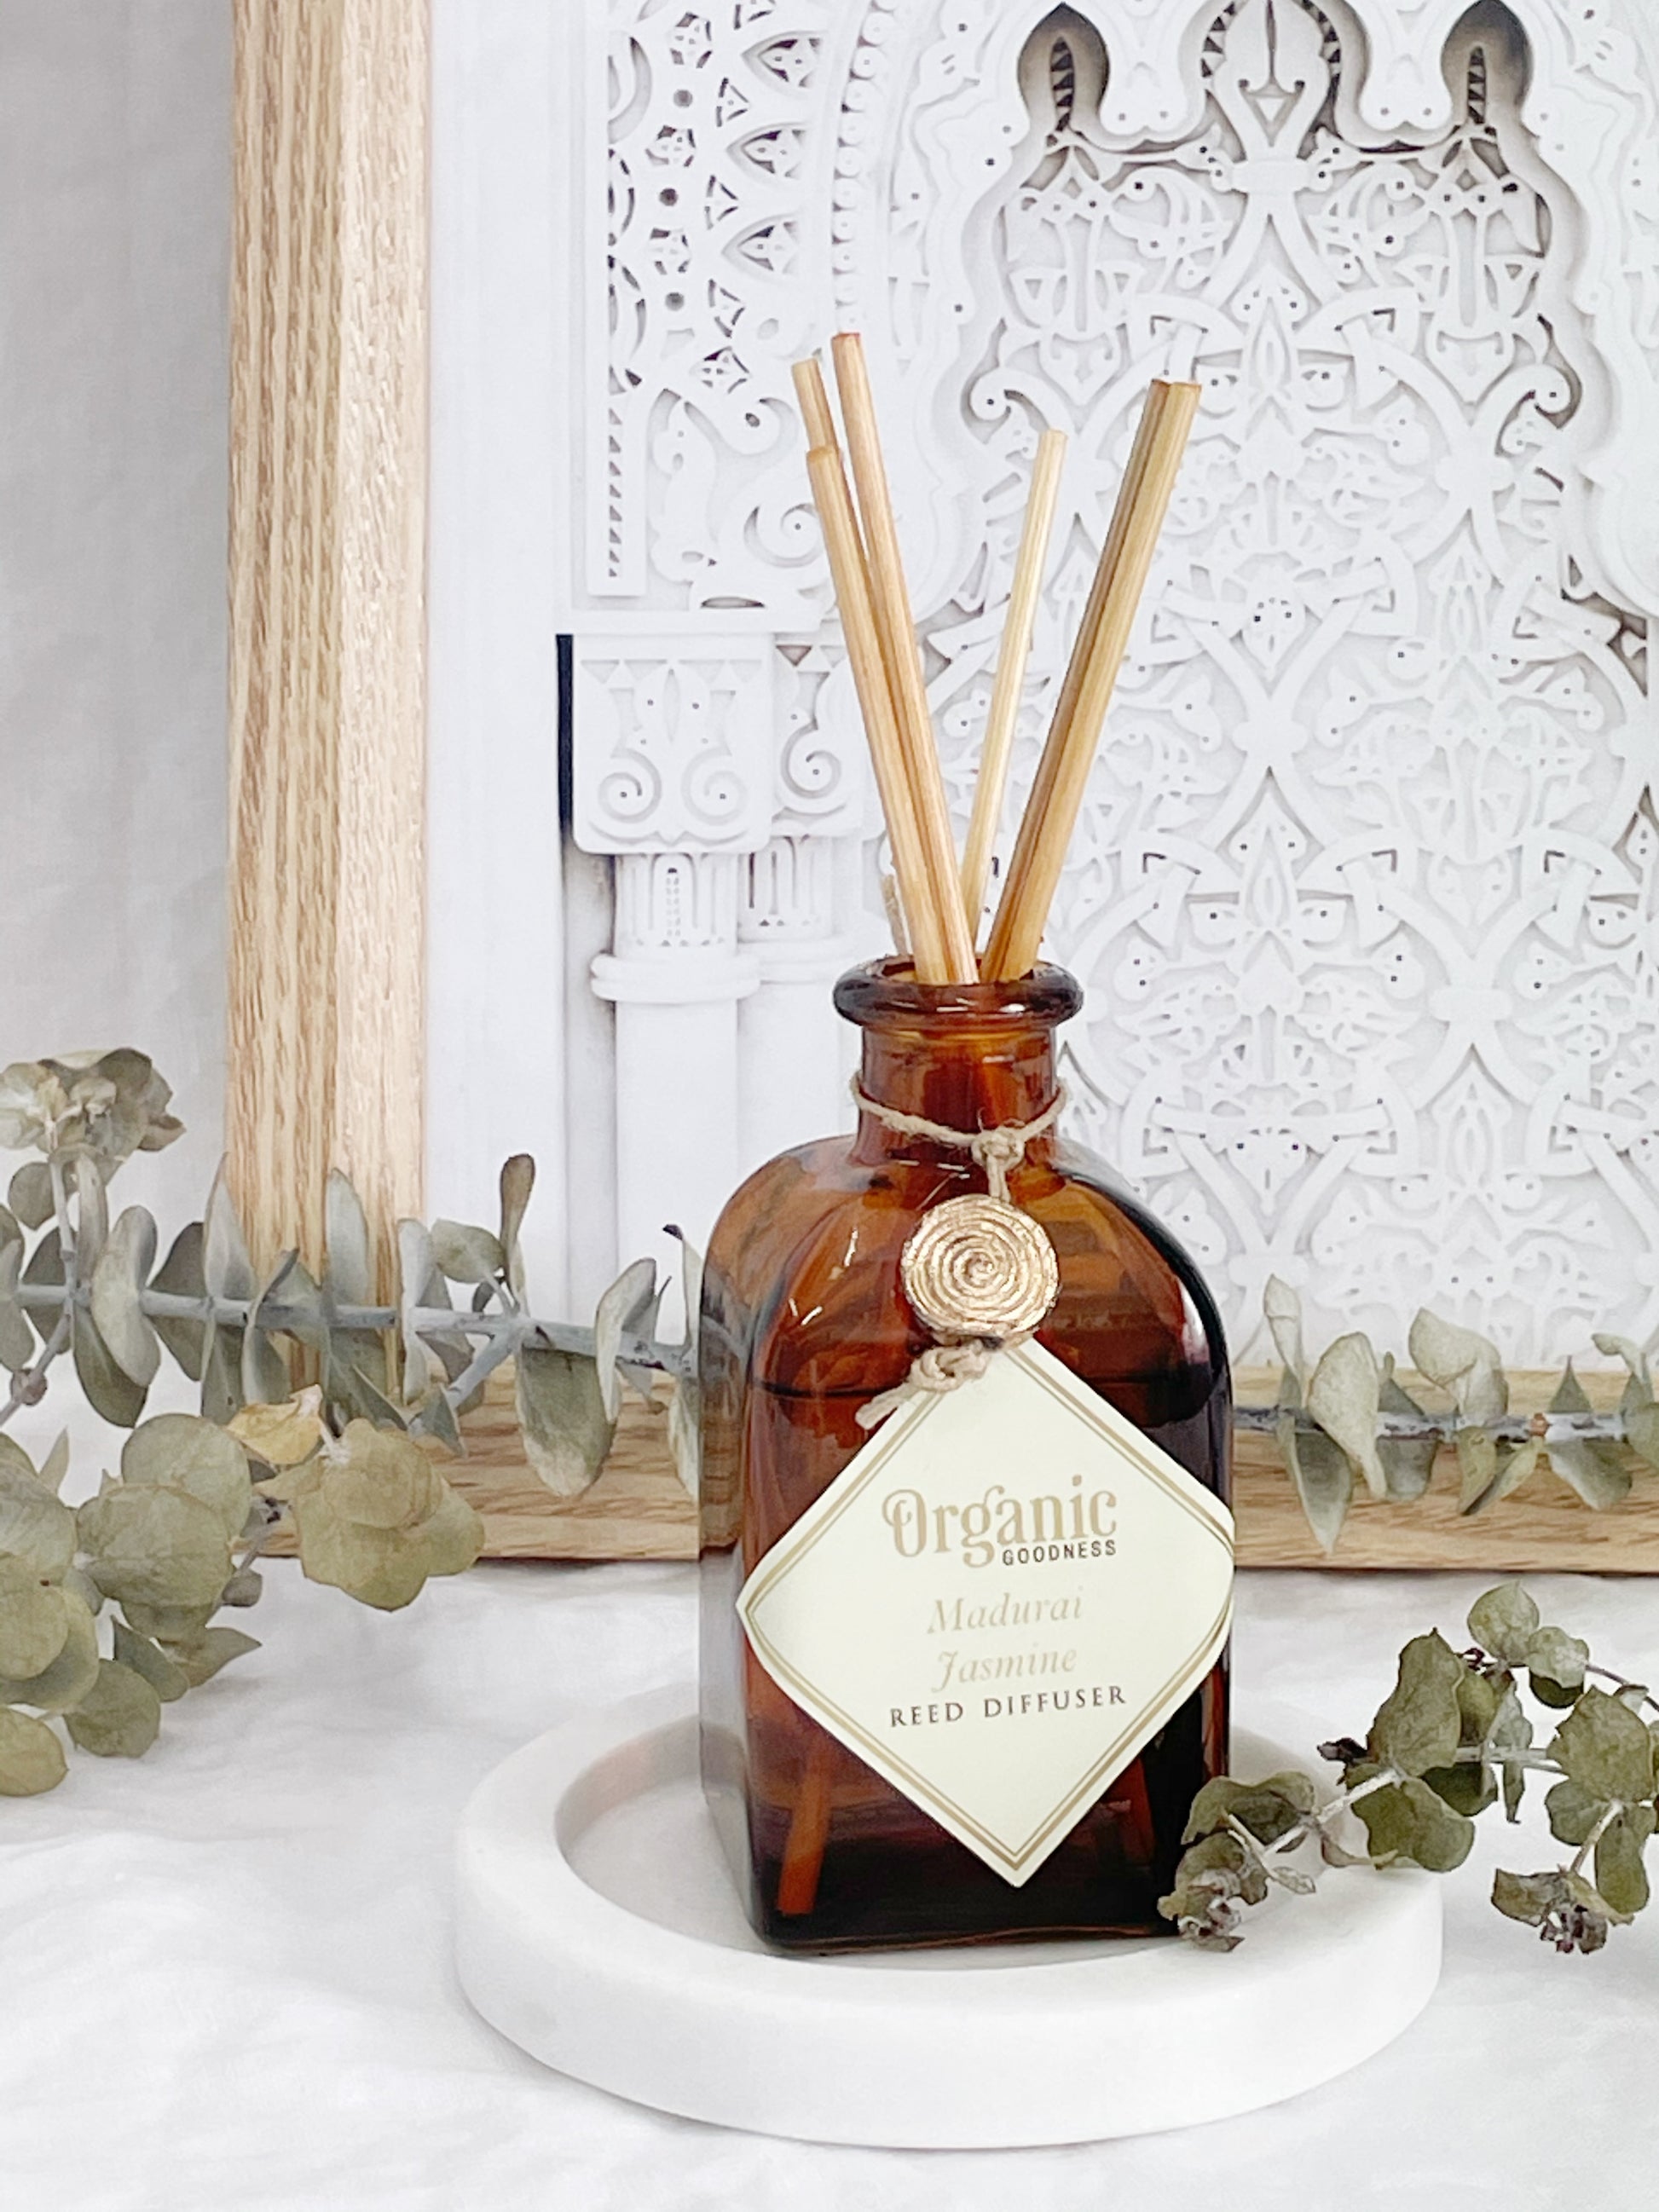 ORGANIC GOODNESS, REED DIFFUSER, STONED AND SAGED AUSTRALIA